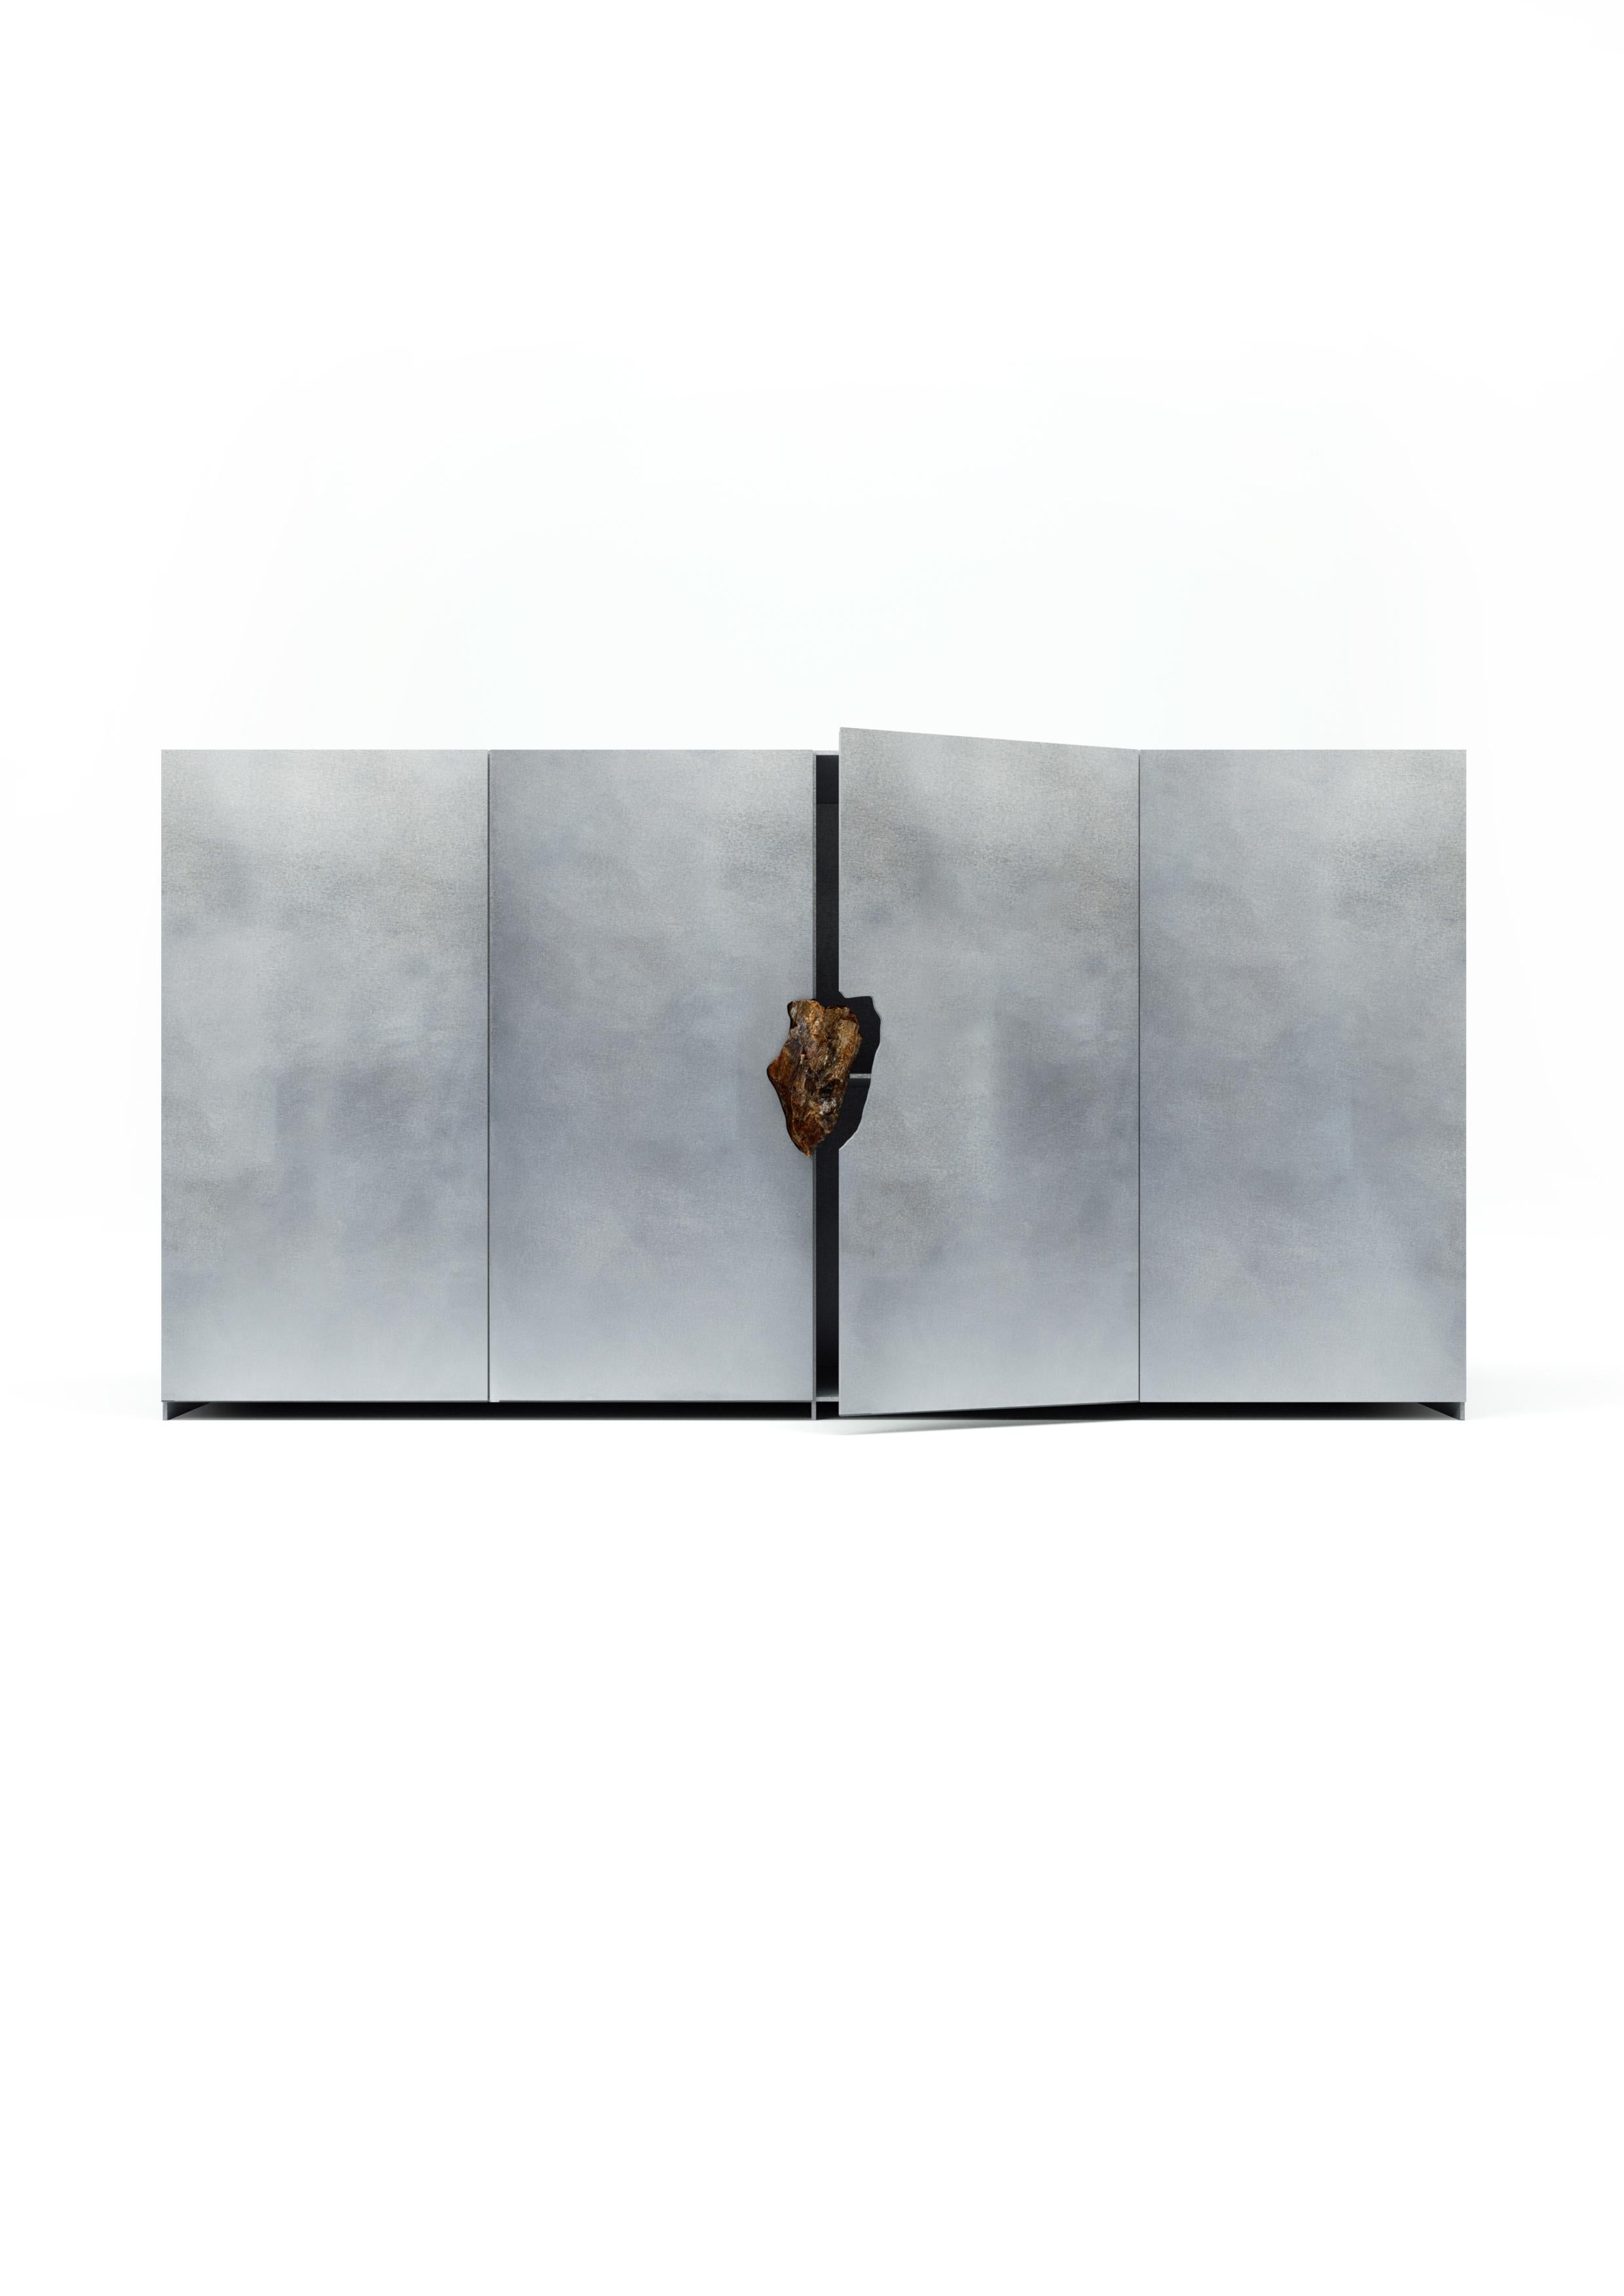 Minimalist Oxidized and Waxed Aluminium Big Cabinet with Petrified Wood by Pierre De Valck For Sale